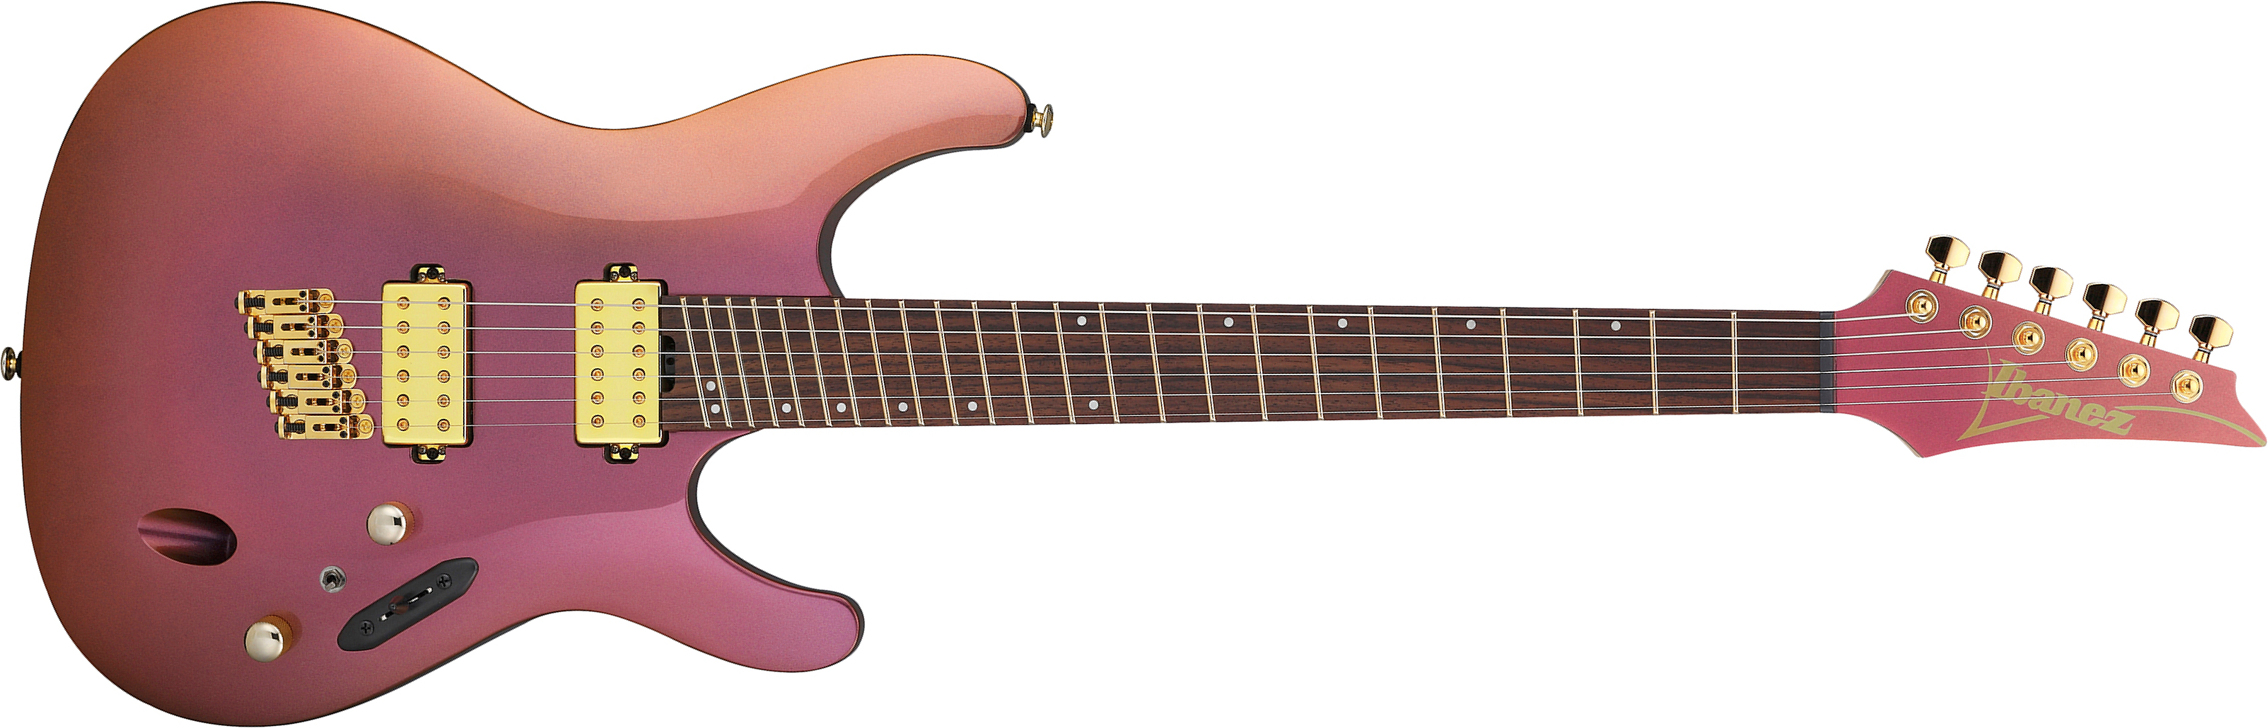 Ibanez Sml721 Rgc Axe Design Lab Multiscale 2h Ht Rw - Rose Gold Chameleon - Multi-Scale Guitar - Main picture